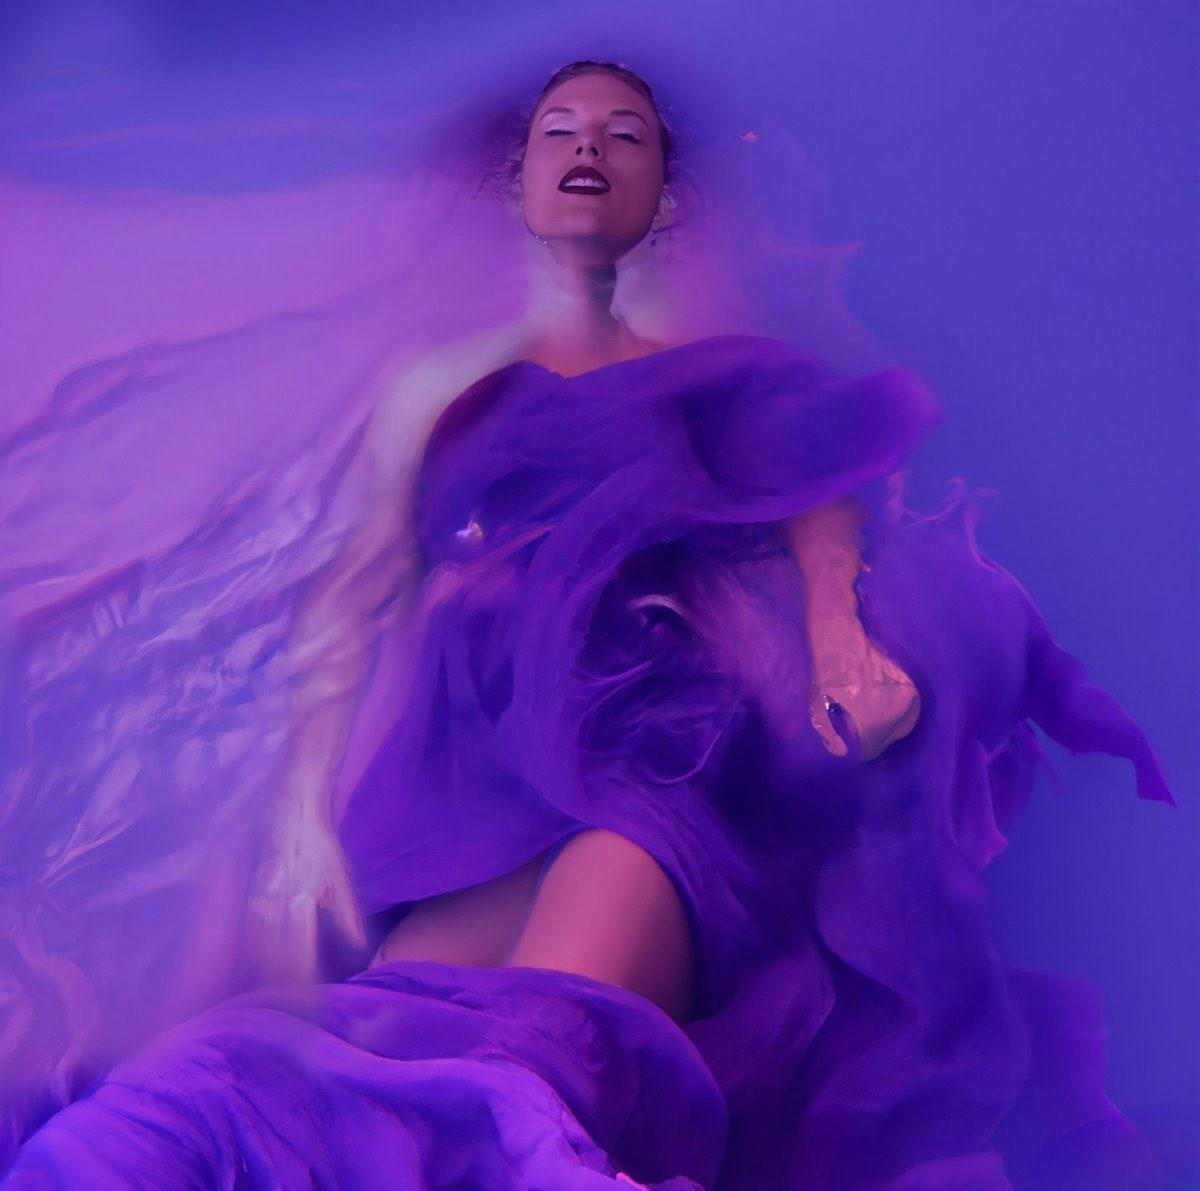 Opinion: Taylor Swift's 'Lavender Haze' music video hints to other projects